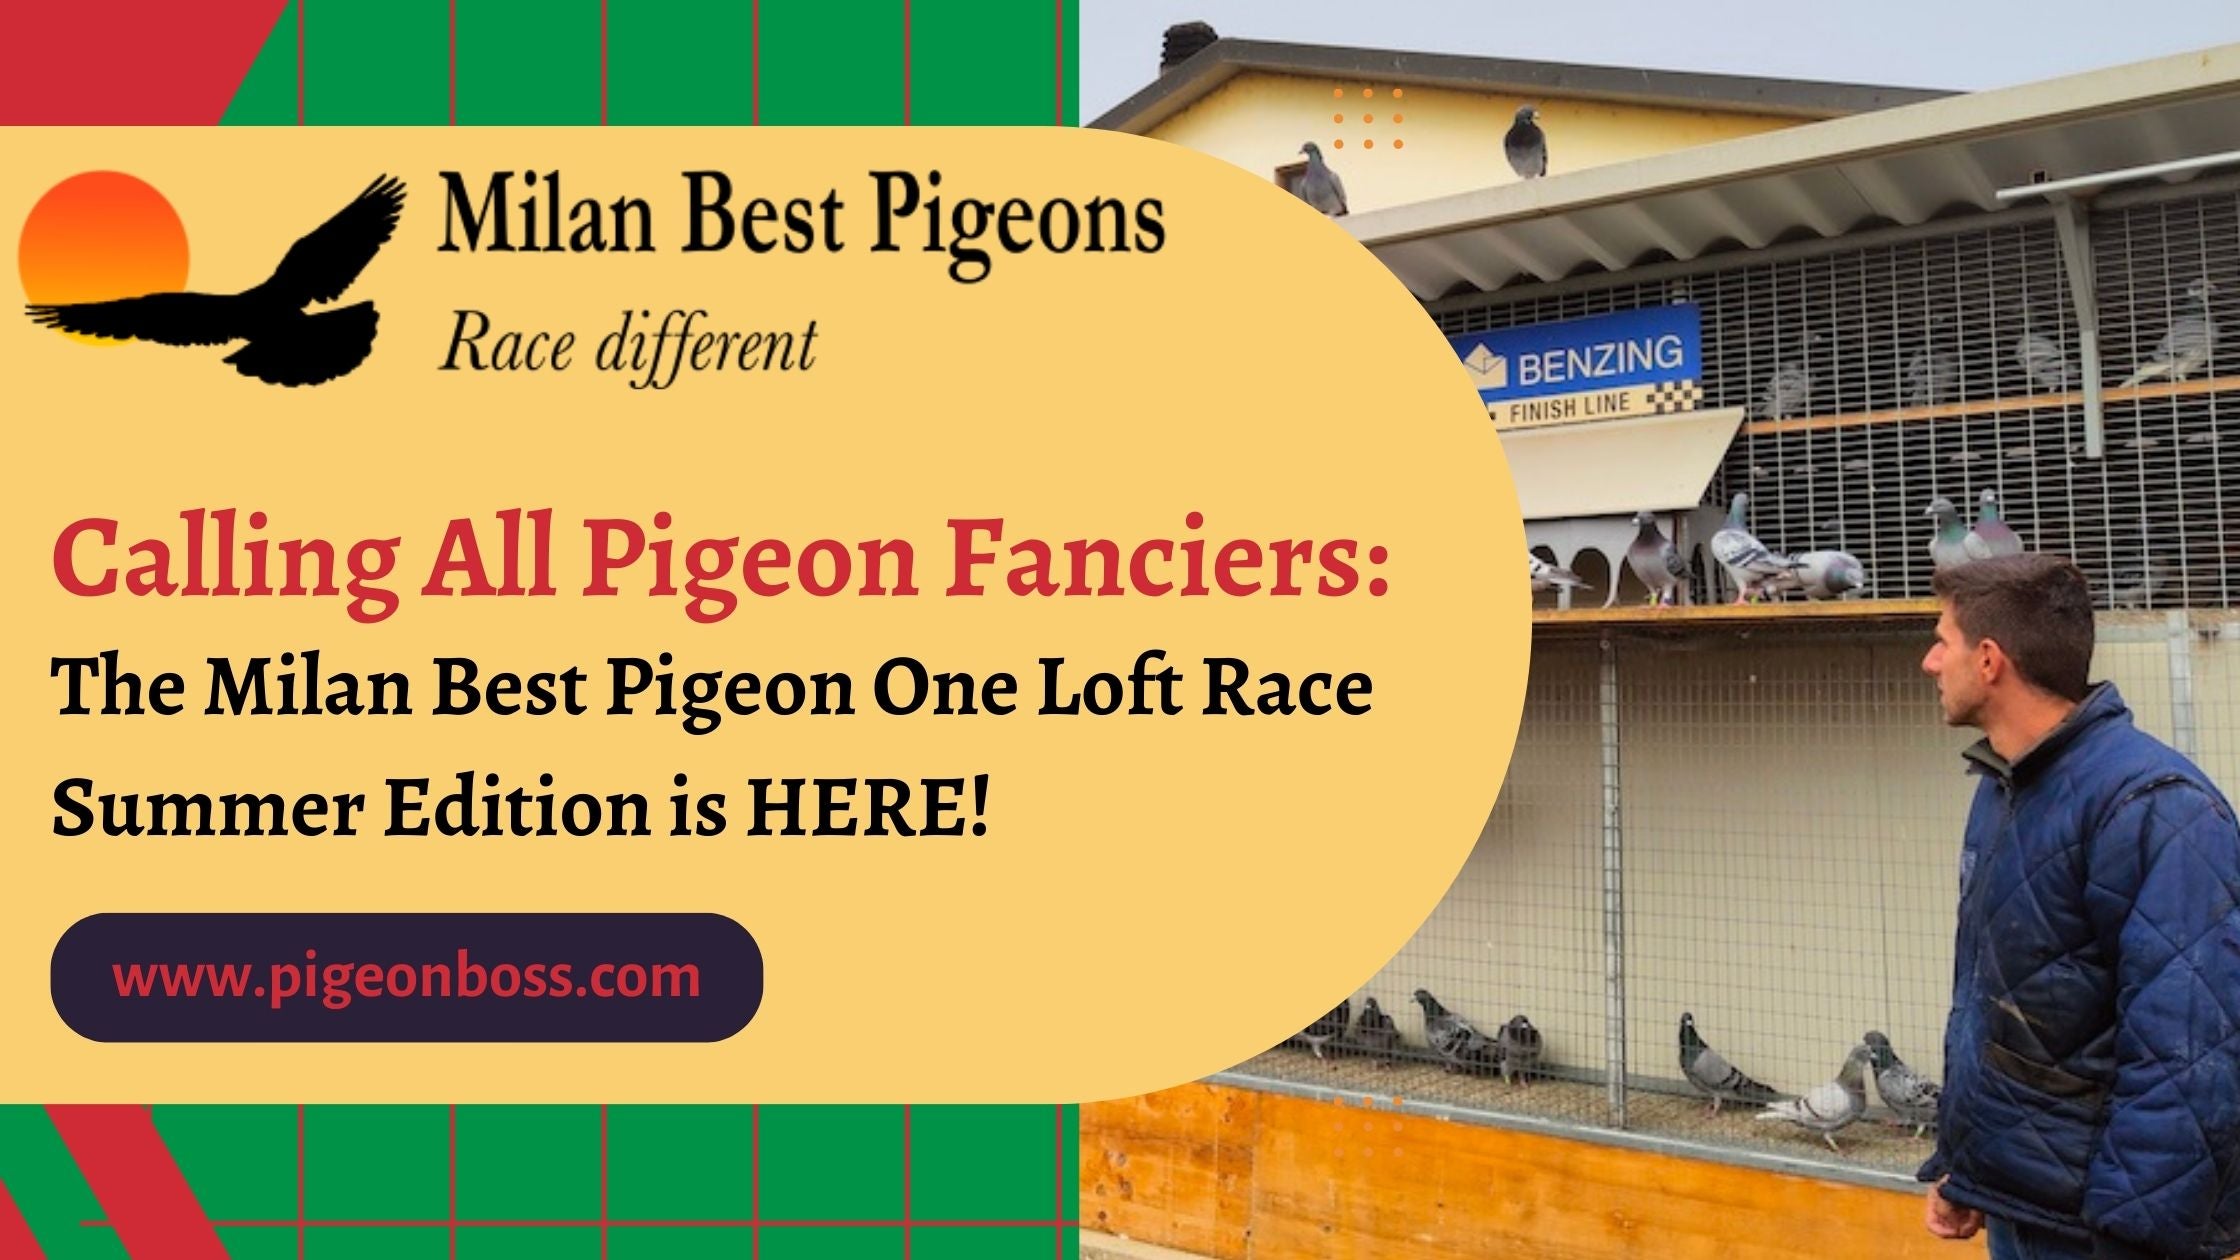 Calling All Pigeon Fanciers: The Milan Best Pigeon One Loft Race Summer Edition is HERE!